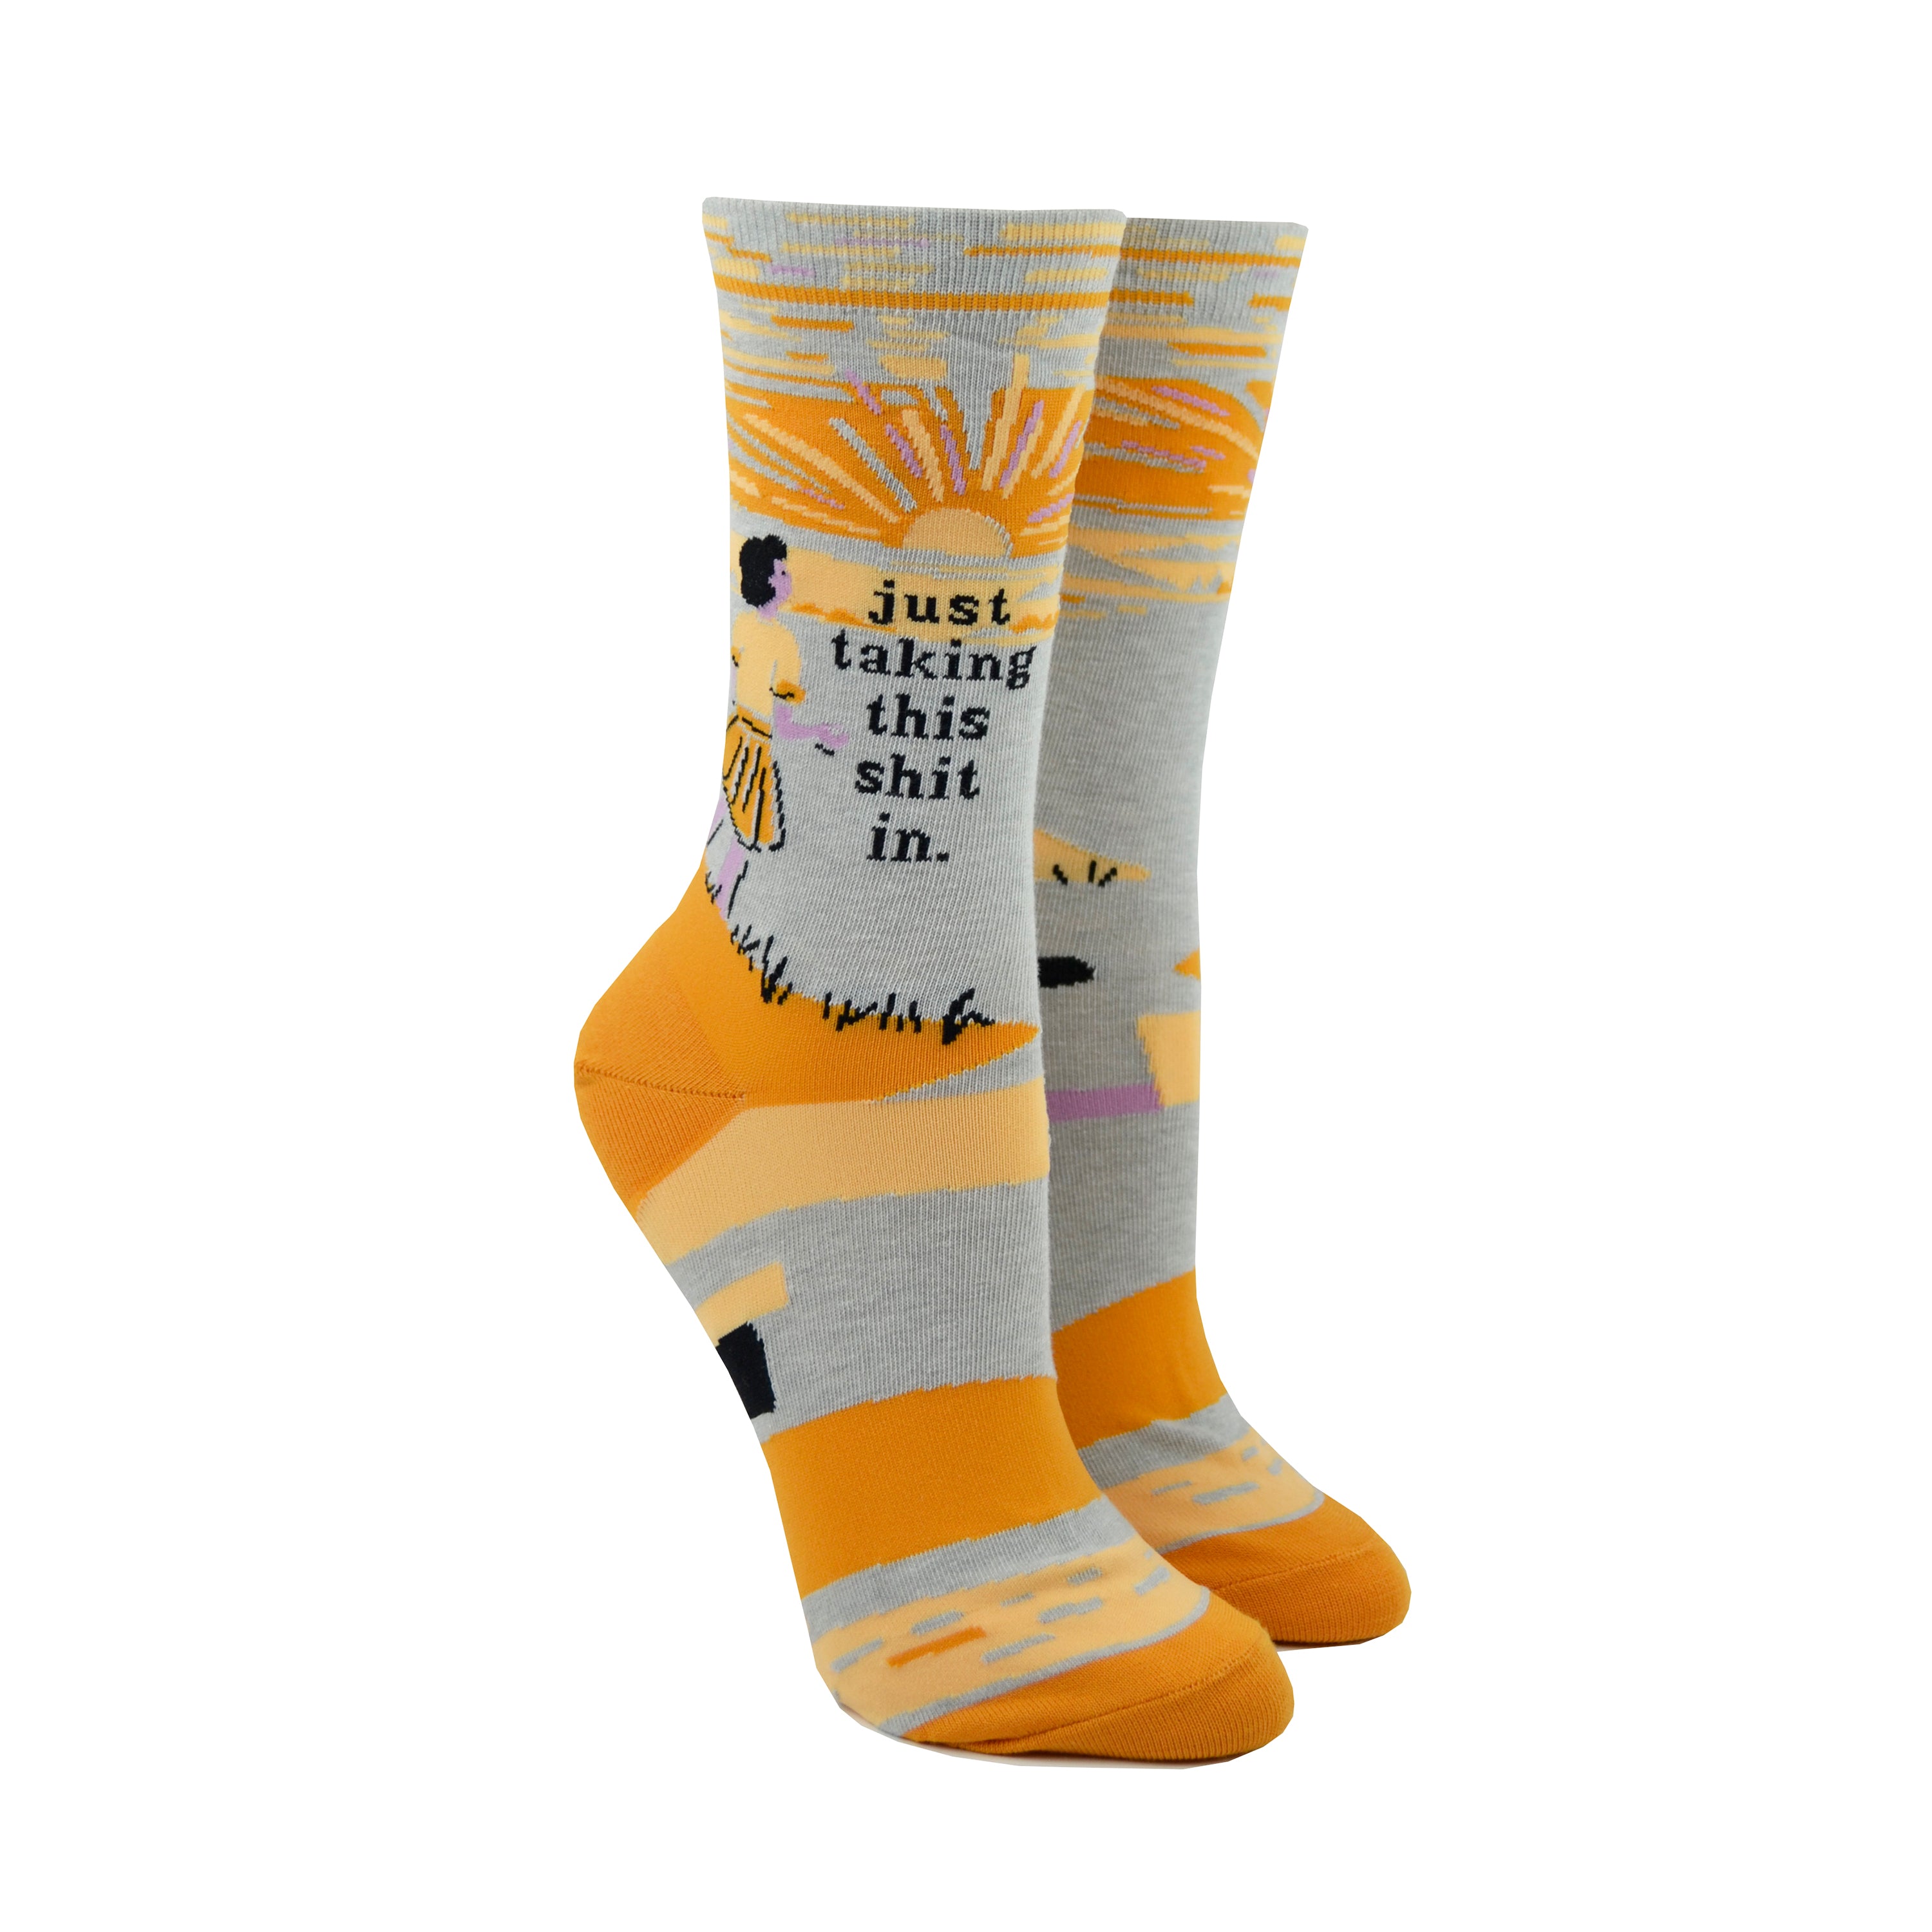 Shown on leg forms, a pair of light grey socks with an orange heel and toe. These socks feature a cartoon woman watching the sunset with the phrase, 